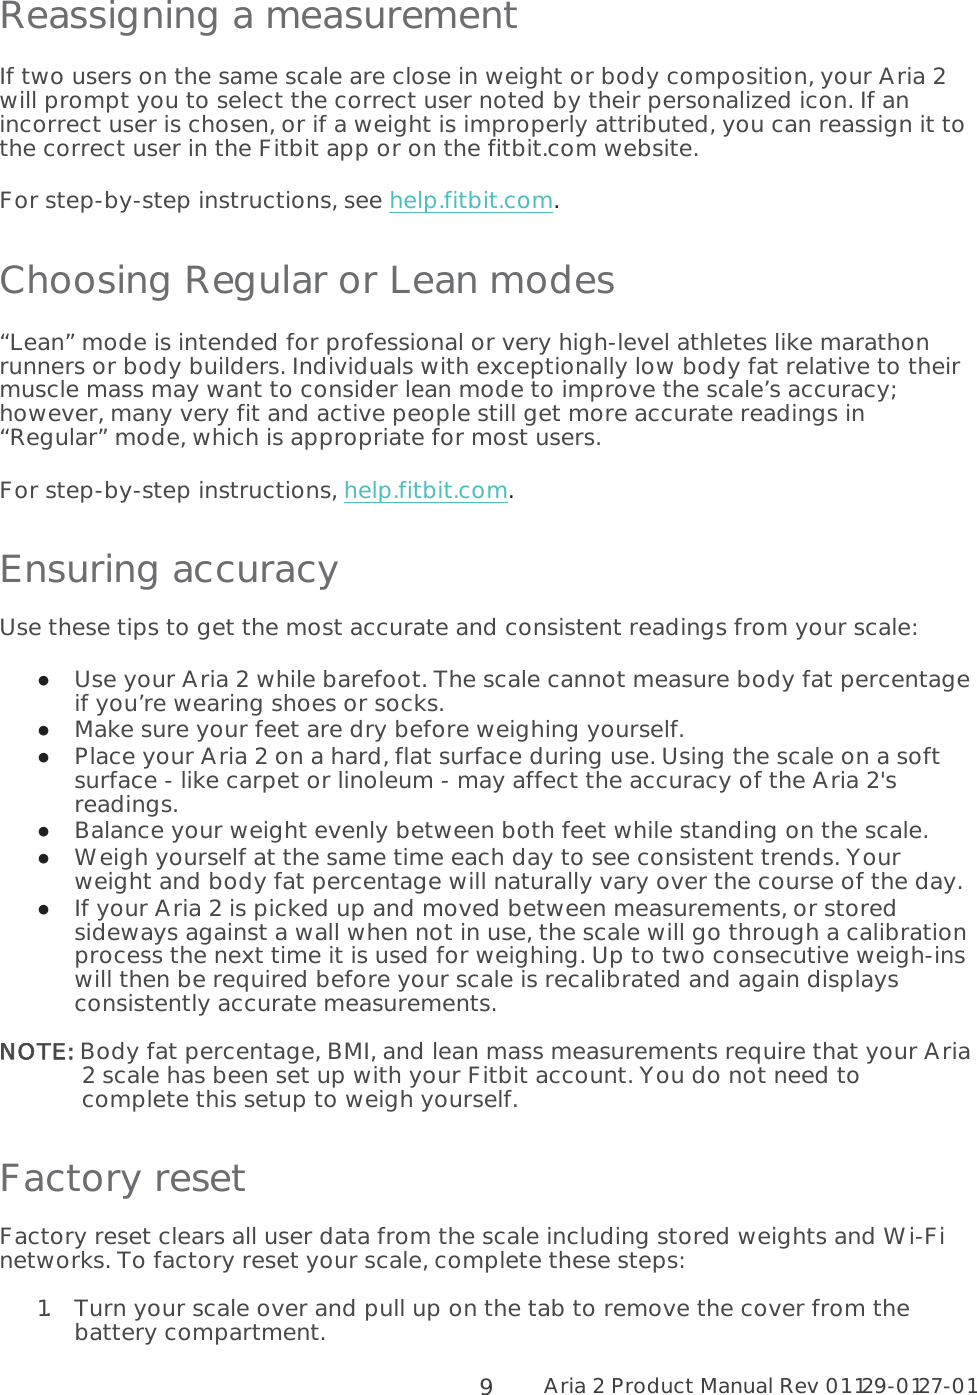 Aria 2 Product Manual Rev 01 129-0127-01  9 Reassigning a measurement If two users on the same scale are close in weight or body composition, your Aria 2 will prompt you to select the correct user noted by their personalized icon. If an incorrect user is chosen, or if a weight is improperly attributed, you can reassign it to the correct user in the Fitbit app or on the fitbit.com website. For step-by-step instructions, see help.fitbit.com.  Choosing Regular or Lean modes “Lean” mode is intended for professional or very high-level athletes like marathon runners or body builders. Individuals with exceptionally low body fat relative to their muscle mass may want to consider lean mode to improve the scale’s accuracy; however, many very fit and active people still get more accurate readings in “Regular” mode, which is appropriate for most users.  For step-by-step instructions, help.fitbit.com. Ensuring accuracy Use these tips to get the most accurate and consistent readings from your scale:  Use your Aria 2 while barefoot. The scale cannot measure body fat percentage if you’re wearing shoes or socks.  Make sure your feet are dry before weighing yourself.  Place your Aria 2 on a hard, flat surface during use. Using the scale on a soft surface - like carpet or linoleum - may affect the accuracy of the Aria 2&apos;s readings.  Balance your weight evenly between both feet while standing on the scale.   Weigh yourself at the same time each day to see consistent trends. Your weight and body fat percentage will naturally vary over the course of the day.  If your Aria 2 is picked up and moved between measurements, or stored sideways against a wall when not in use, the scale will go through a calibration process the next time it is used for weighing. Up to two consecutive weigh-ins will then be required before your scale is recalibrated and again displays consistently accurate measurements.  NNOTE: Body fat percentage, BMI, and lean mass measurements require that your Aria 2 scale has been set up with your Fitbit account. You do not need to complete this setup to weigh yourself. Factory reset Factory reset clears all user data from the scale including stored weights and Wi-Fi networks. To factory reset your scale, complete these steps:  1.Turn your scale over and pull up on the tab to remove the cover from the battery compartment. 